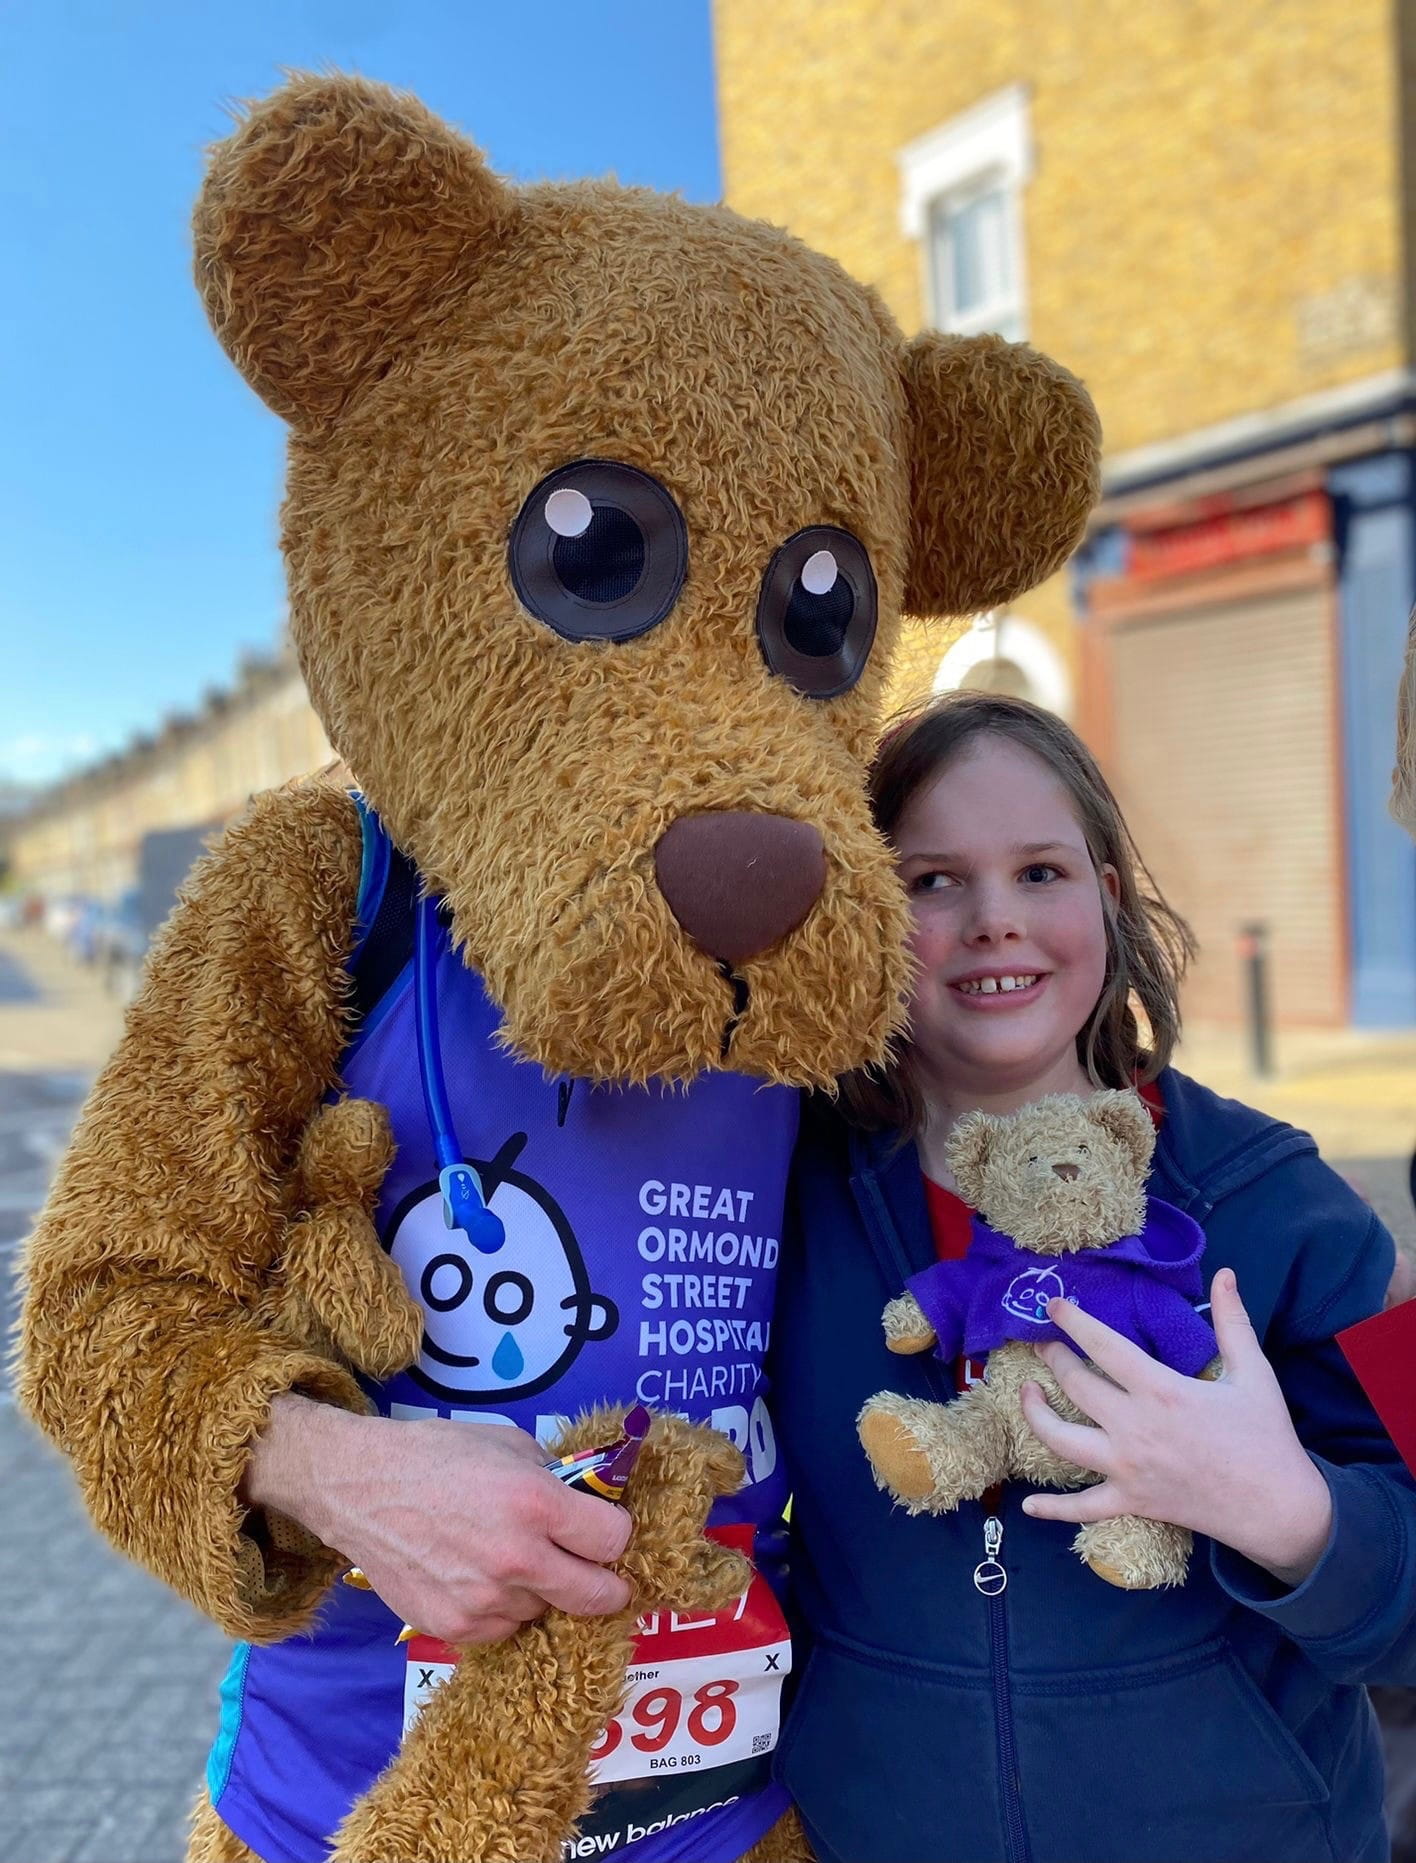 Girl with a GOSH Charity mascot